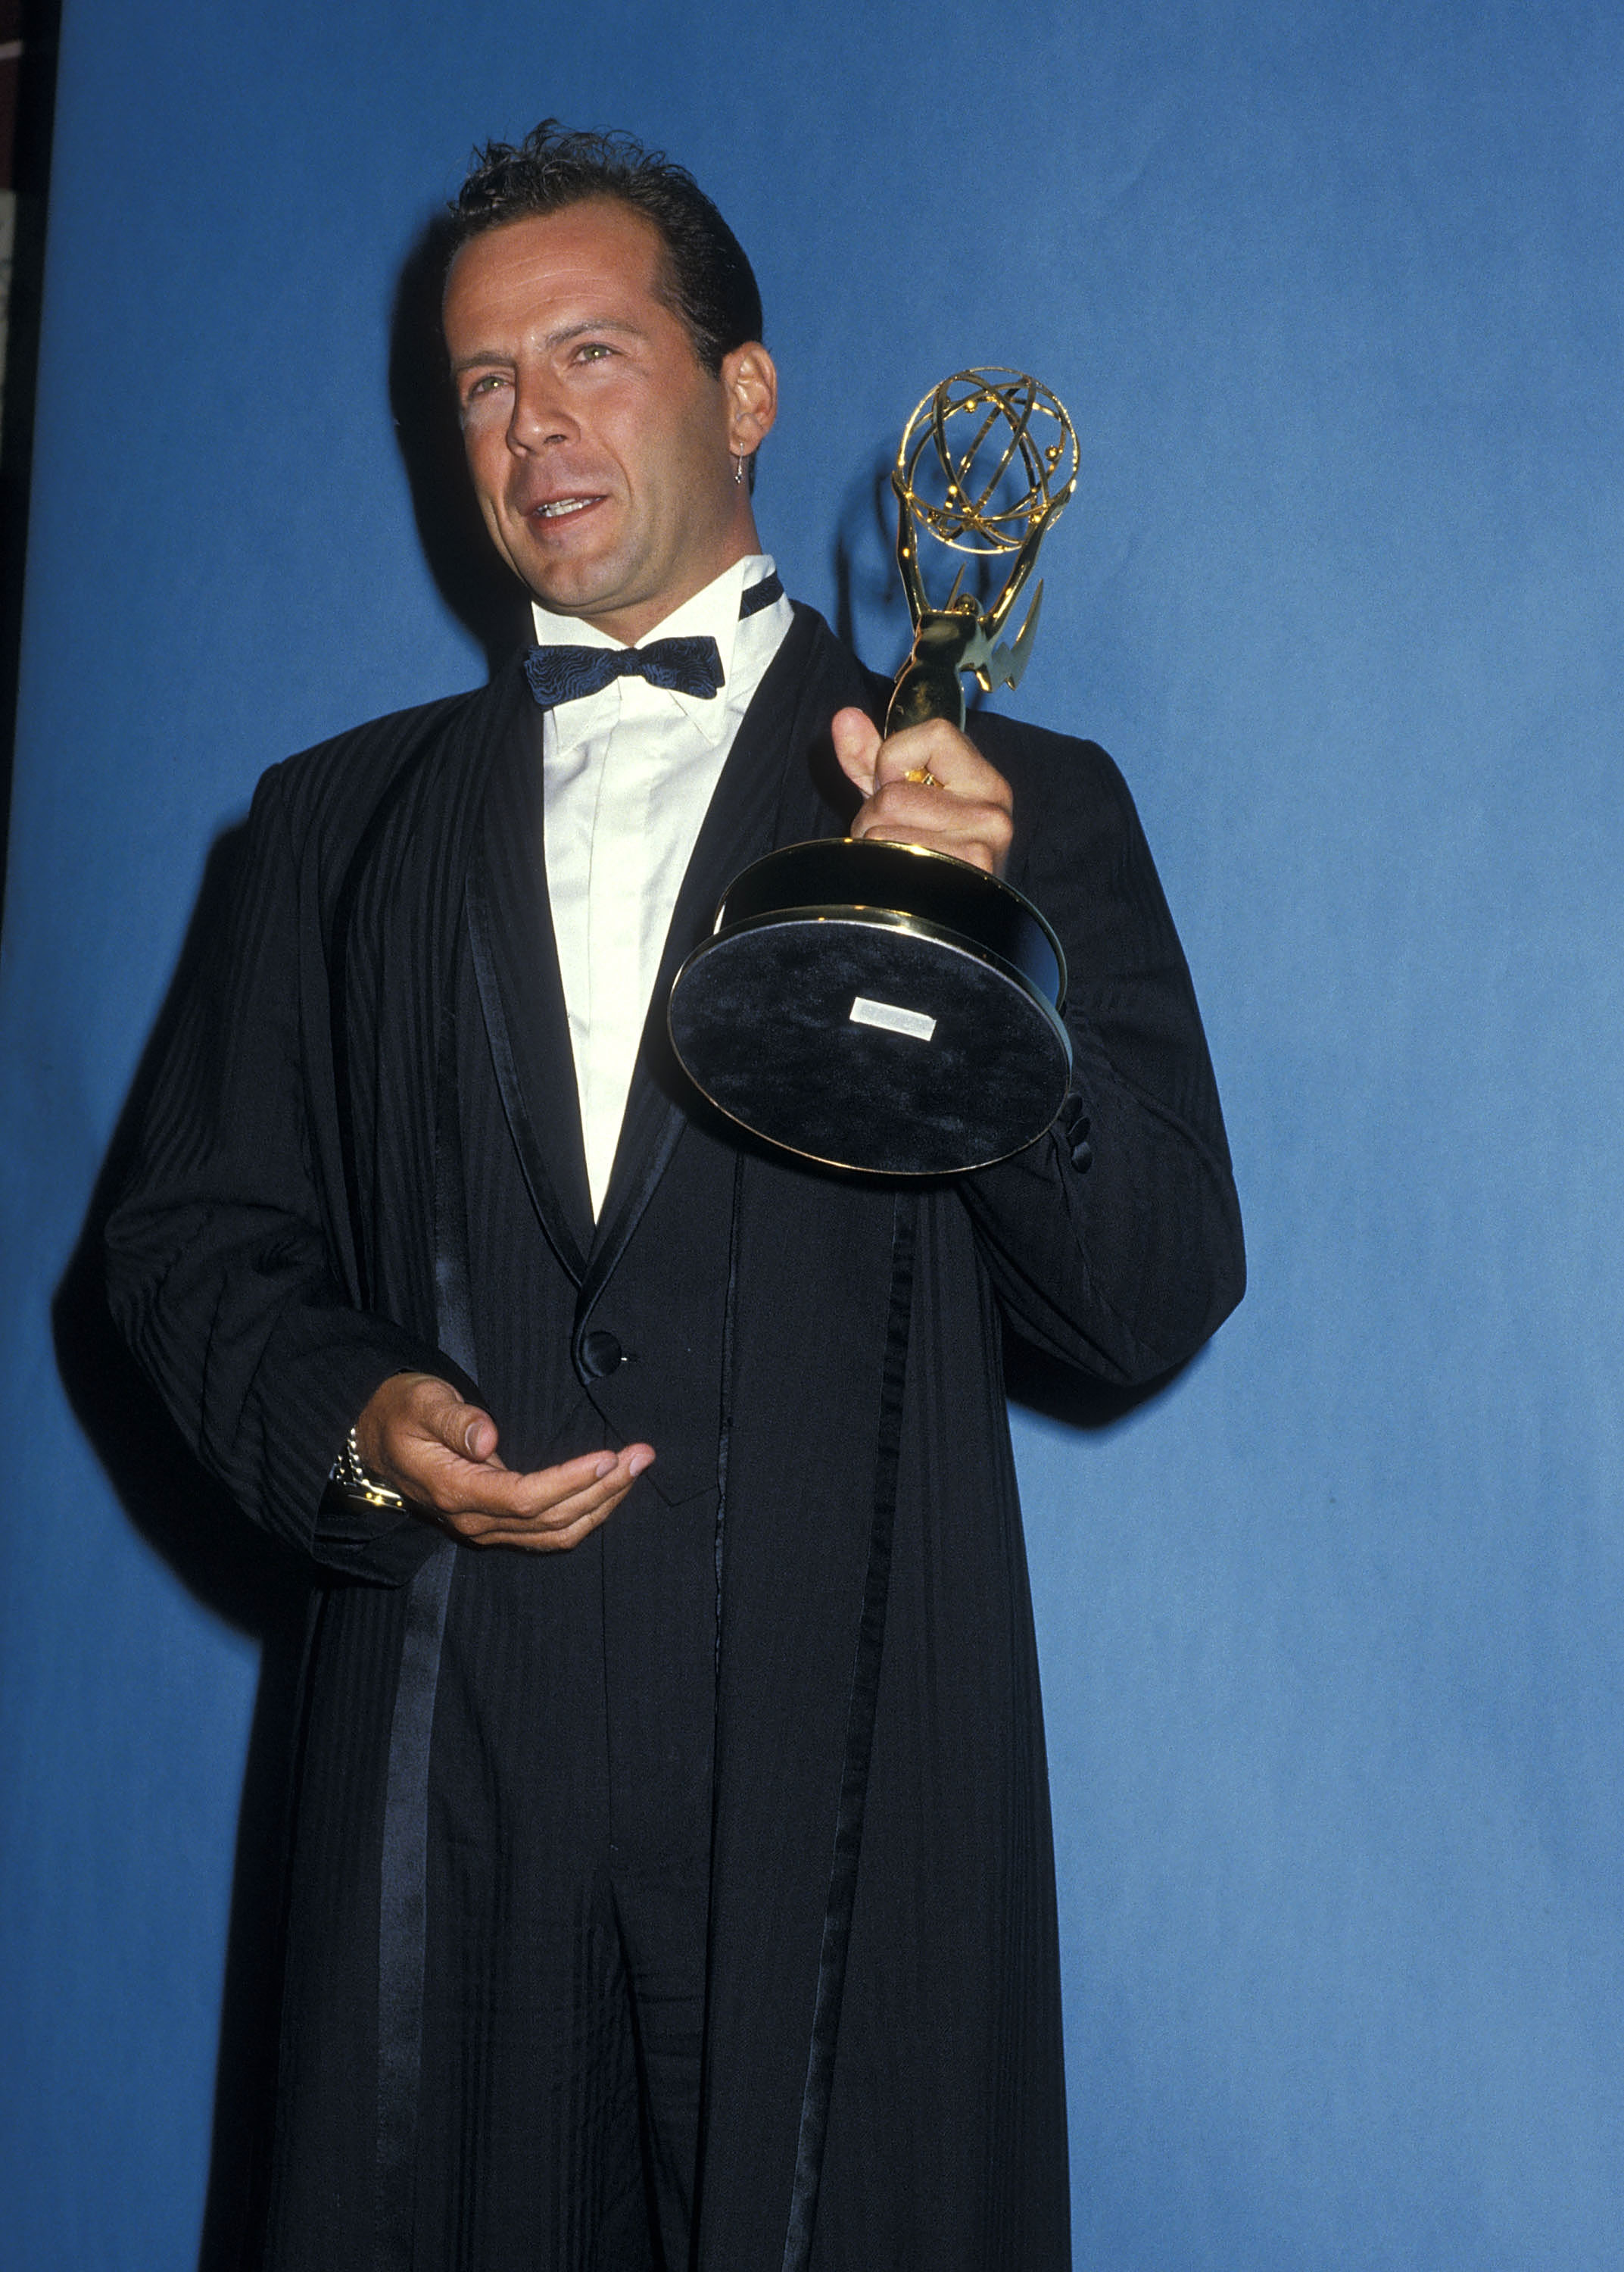 Actor Bruce Willis attends the 39th Annual Primetime Emmy Awards on September 20, 1987 at the Pasadena Civic Auditorium in Pasadena, California. (Ron Galella, Ltd.—WireImage)